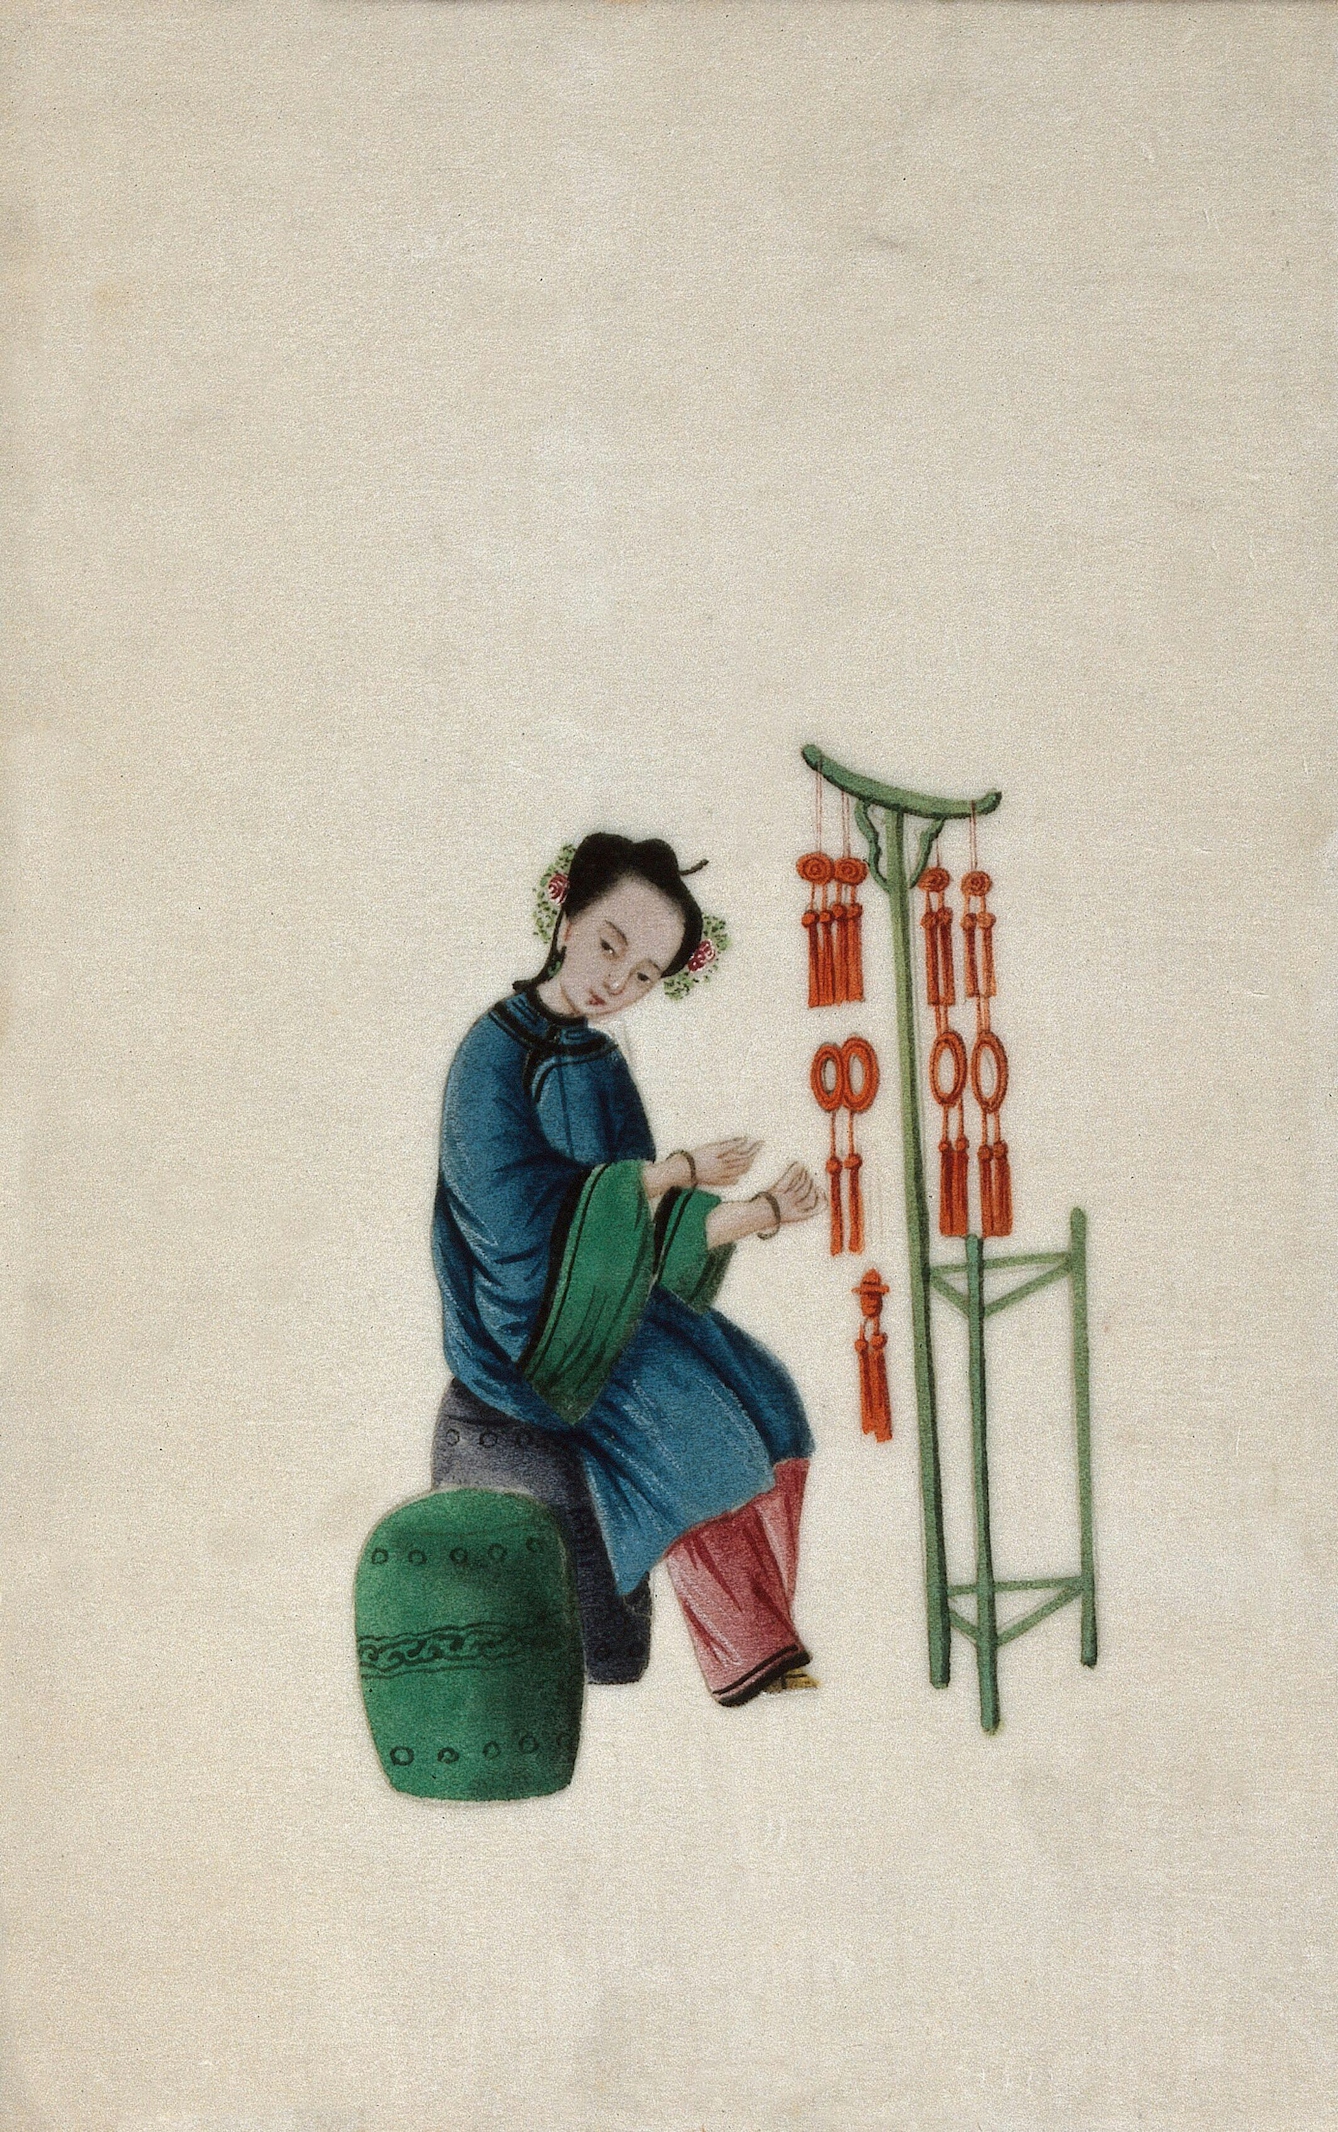 A 1800s watercolour painting of a woman displaying good luck tassels for sale. The tassels are red and are hanging on a green stand. 

The woman is sat upon a gray stool, there is a green stool next to her. She is wearing a blue dress over red trousers. 